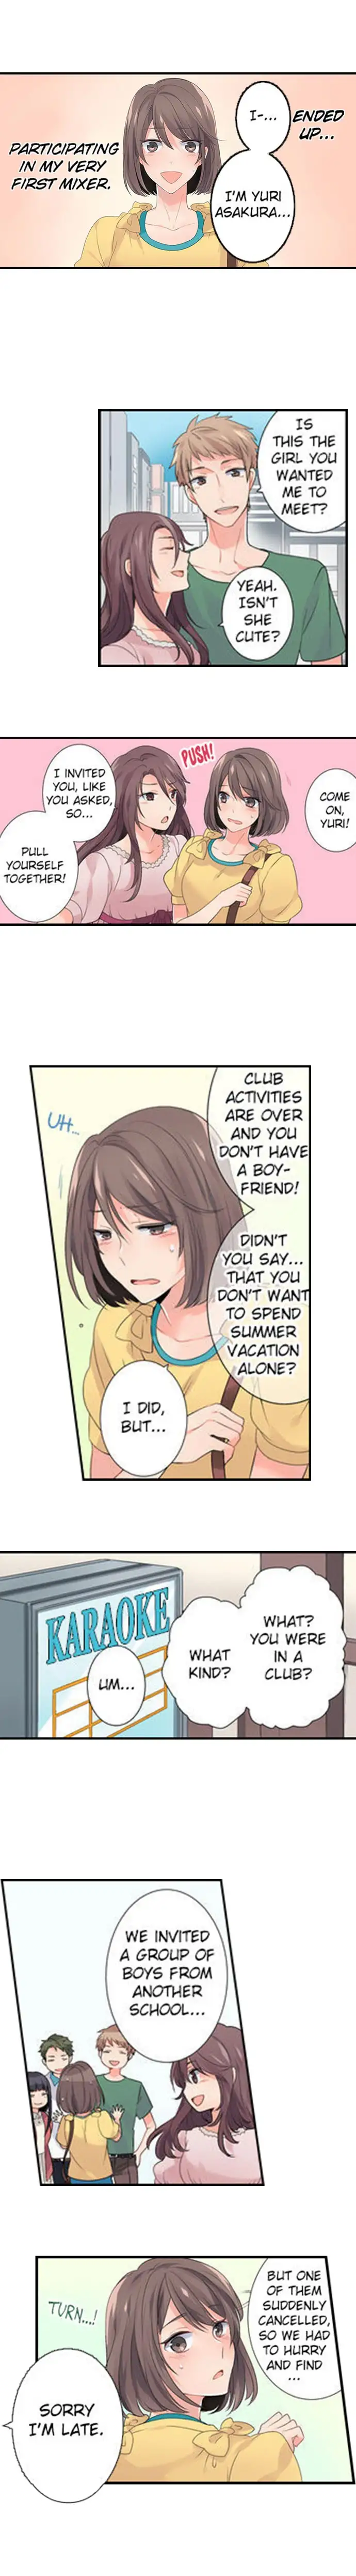 One-Summer Boyfriend -All Our Firsts Together- - Chapter 1 Page 3